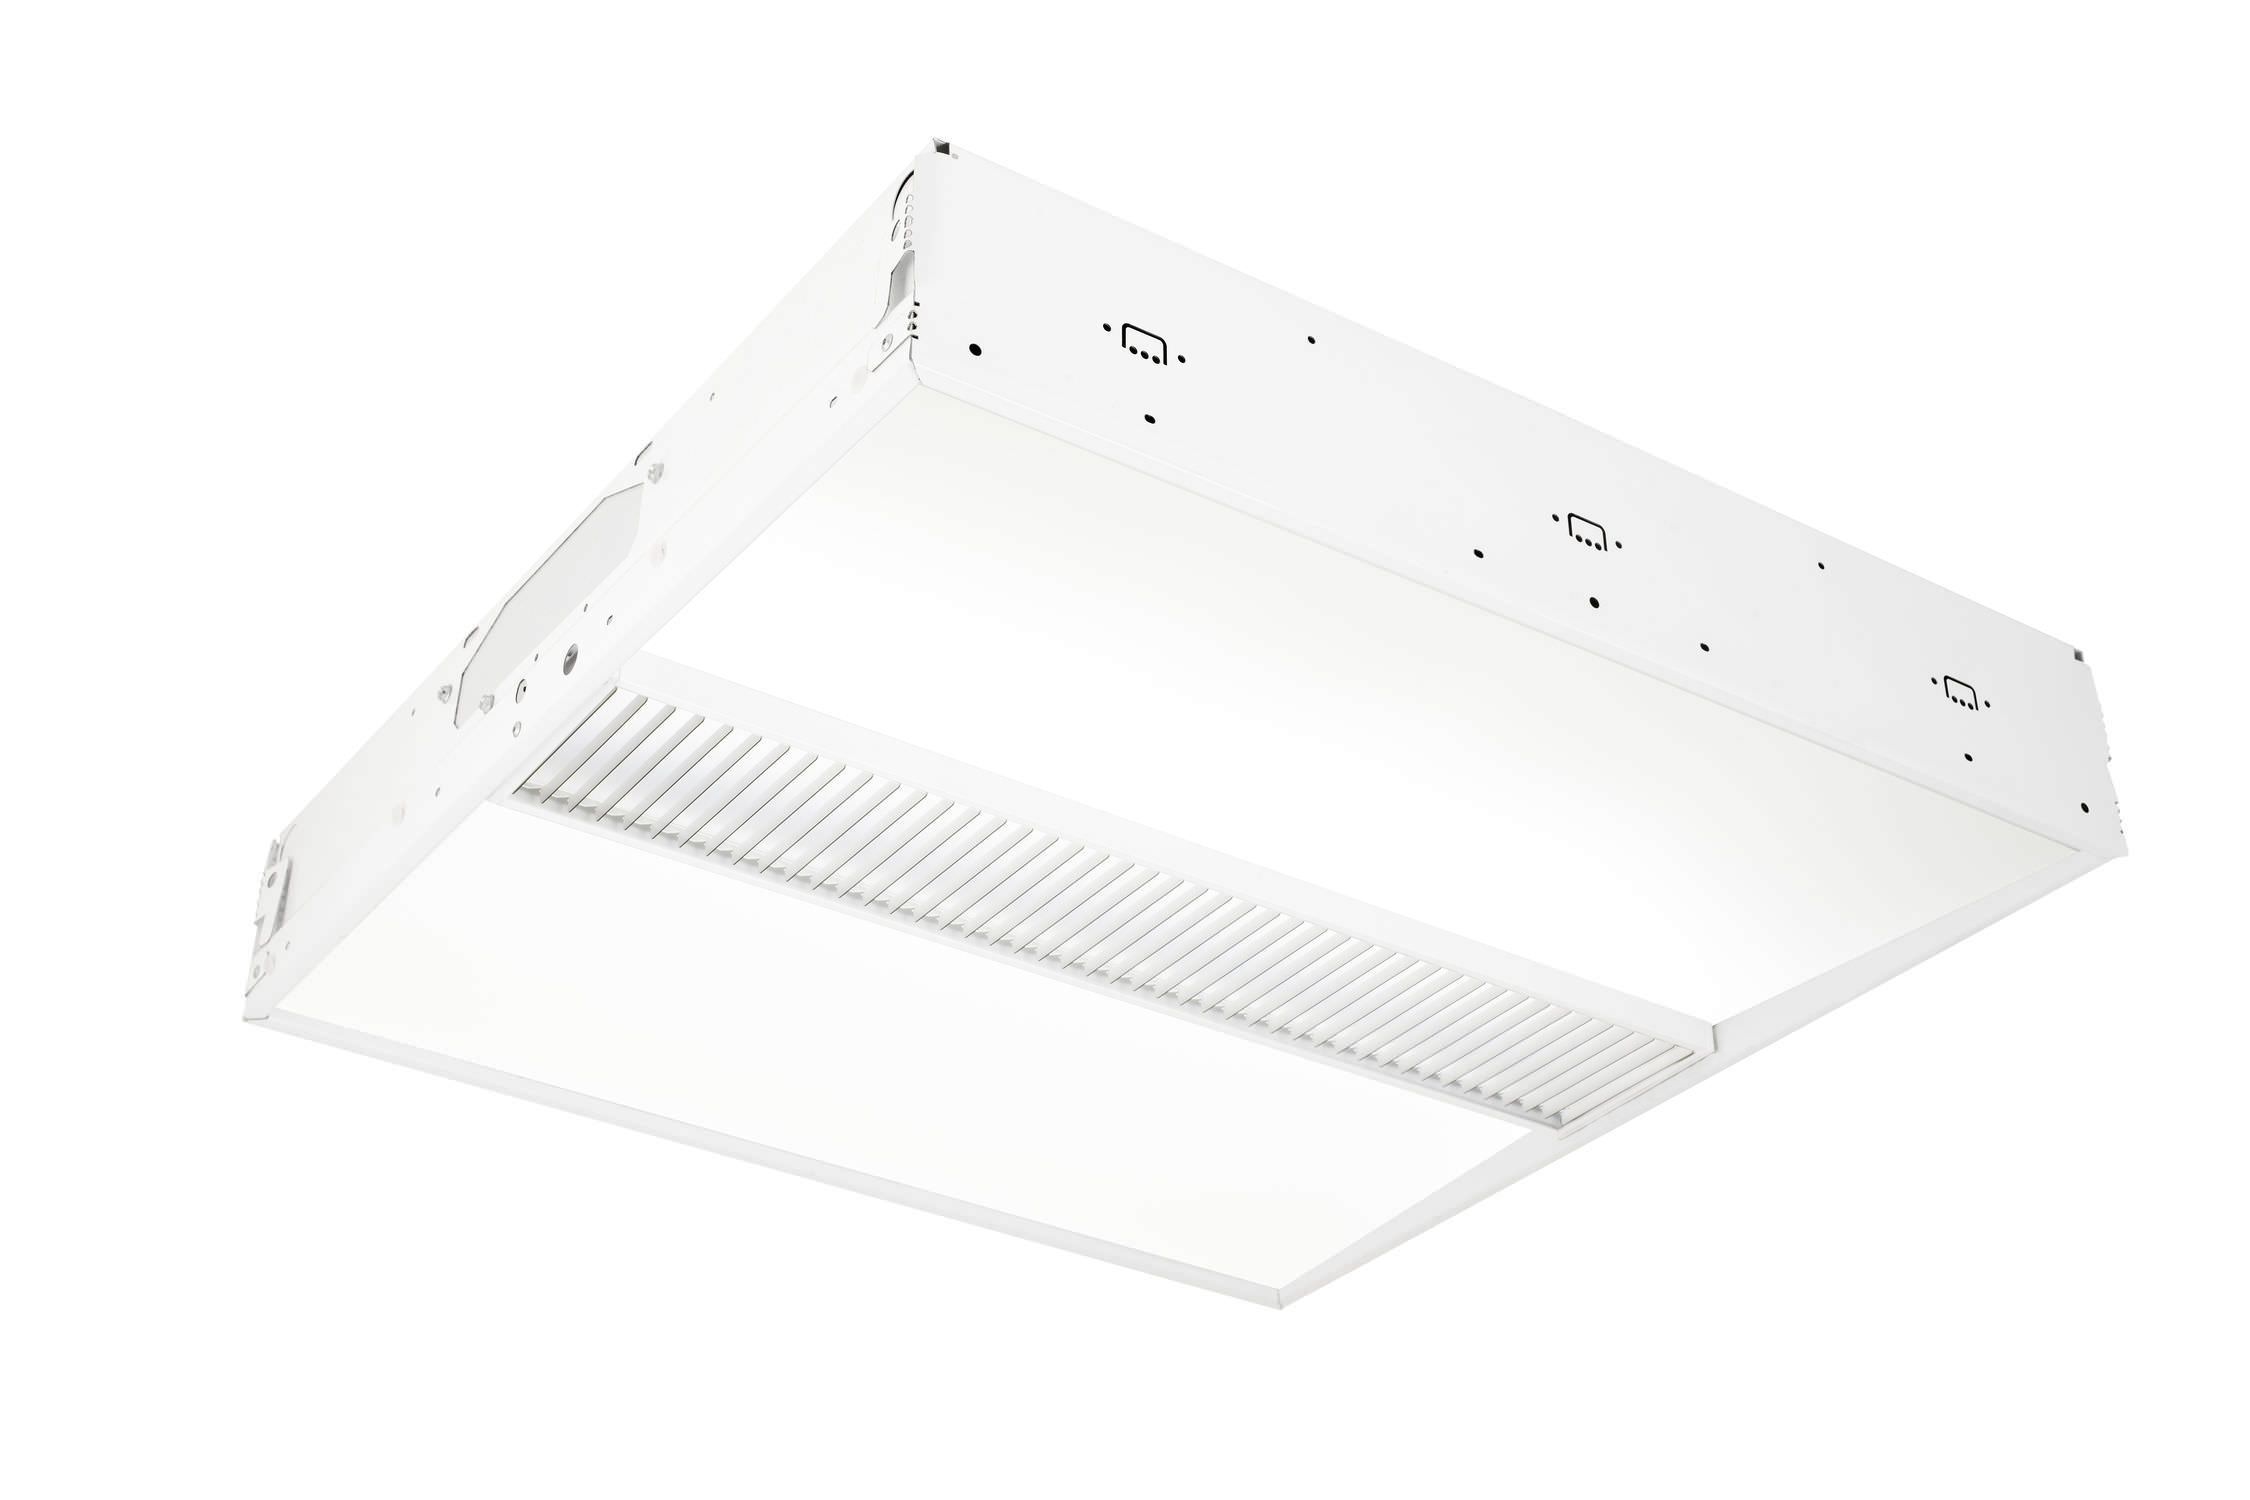 Ceiling-mounted lighting / for healthcare facilities / LED LITEWAVE HF LED Litecontrol Corporation